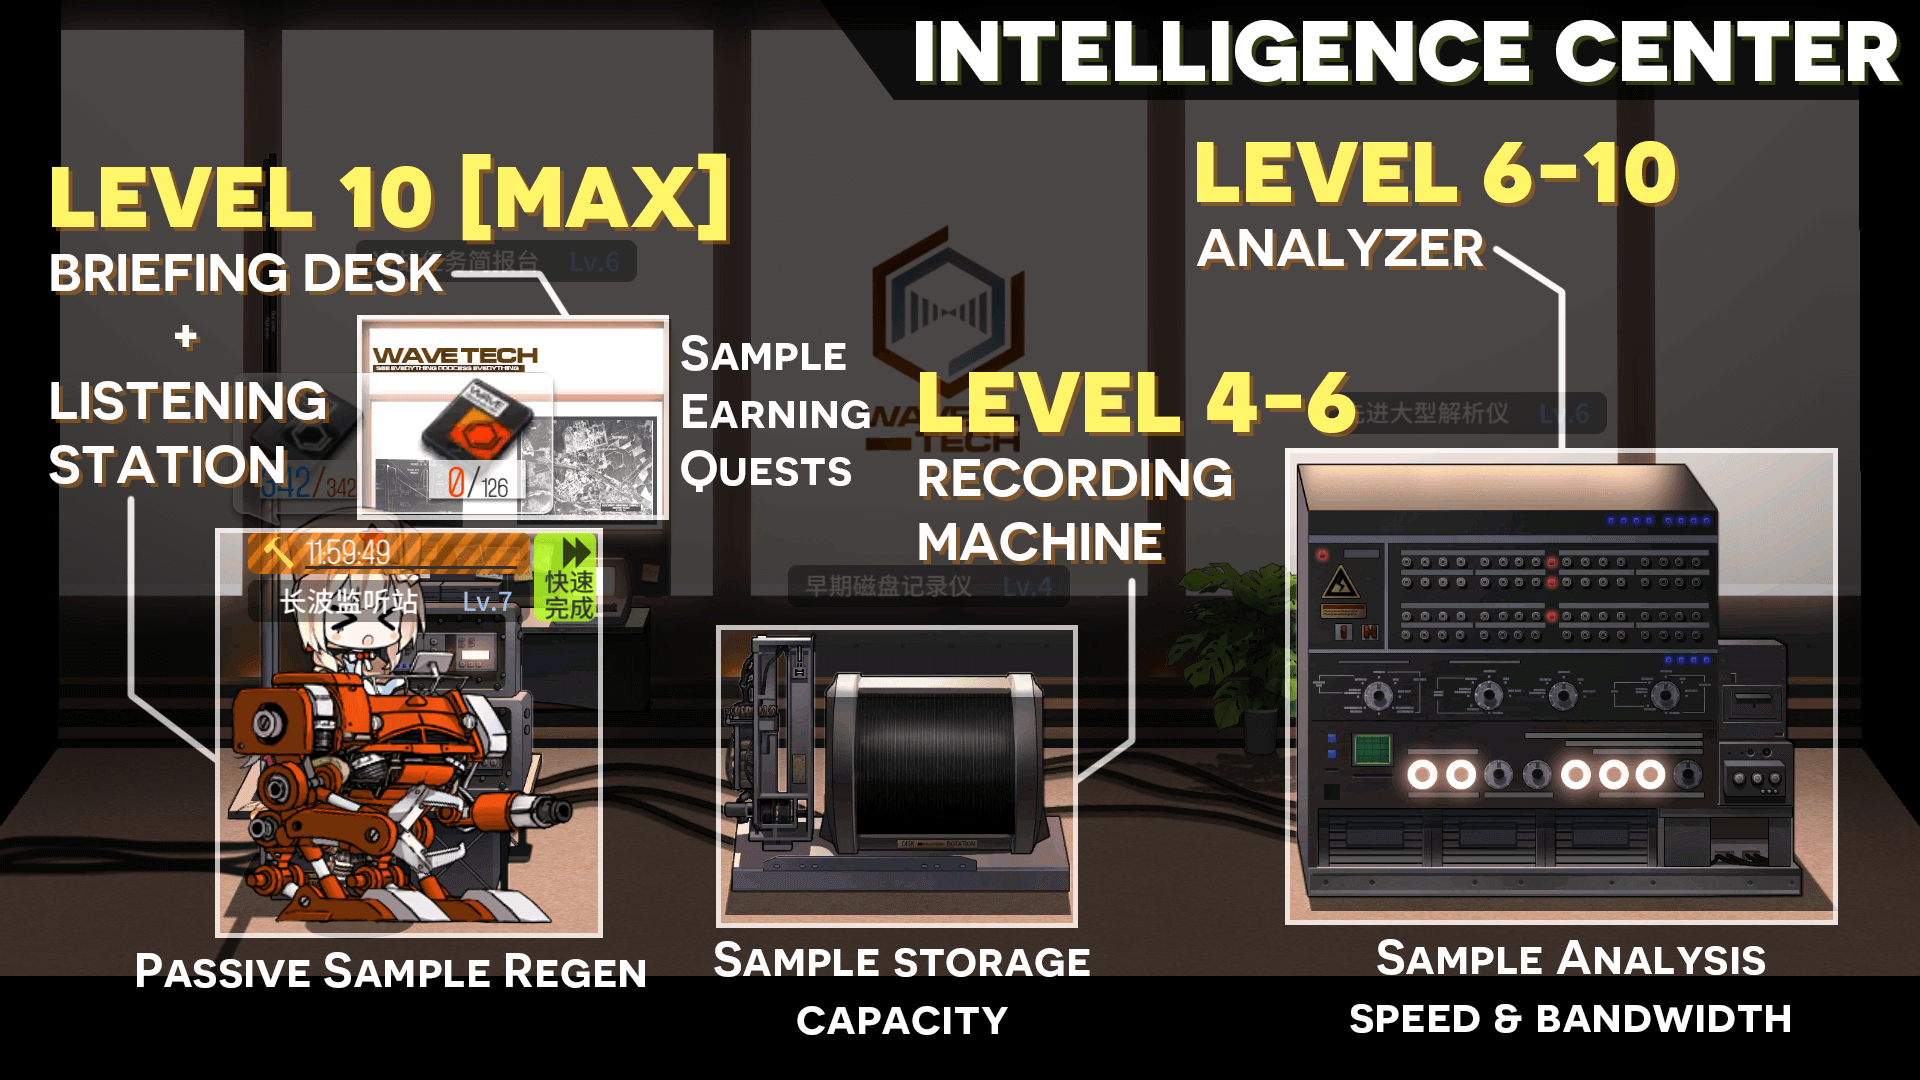 TL;DR Infographic on upgrading the Intelligence Center facilities